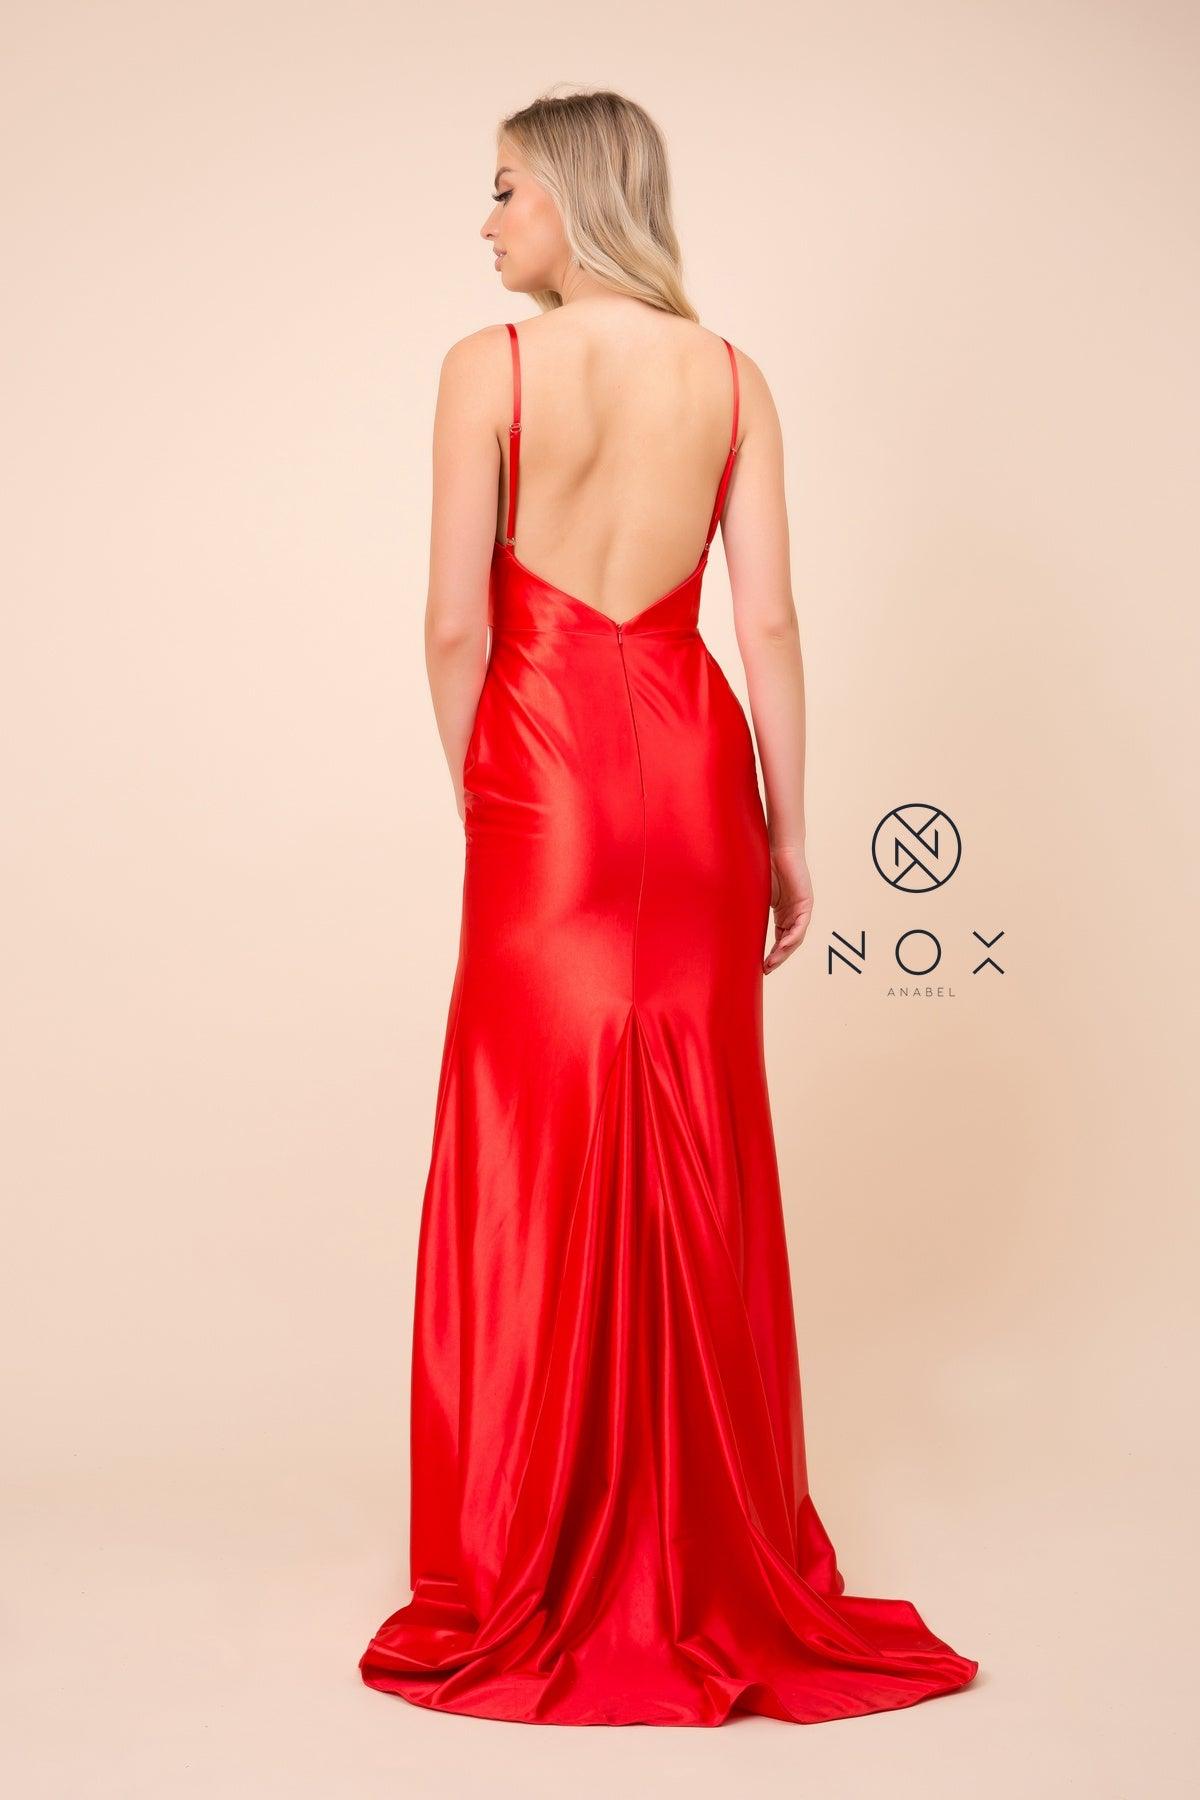 Long Sexy Satin High Slit Prom Dress Evening Gown - The Dress Outlet Nox Anabel